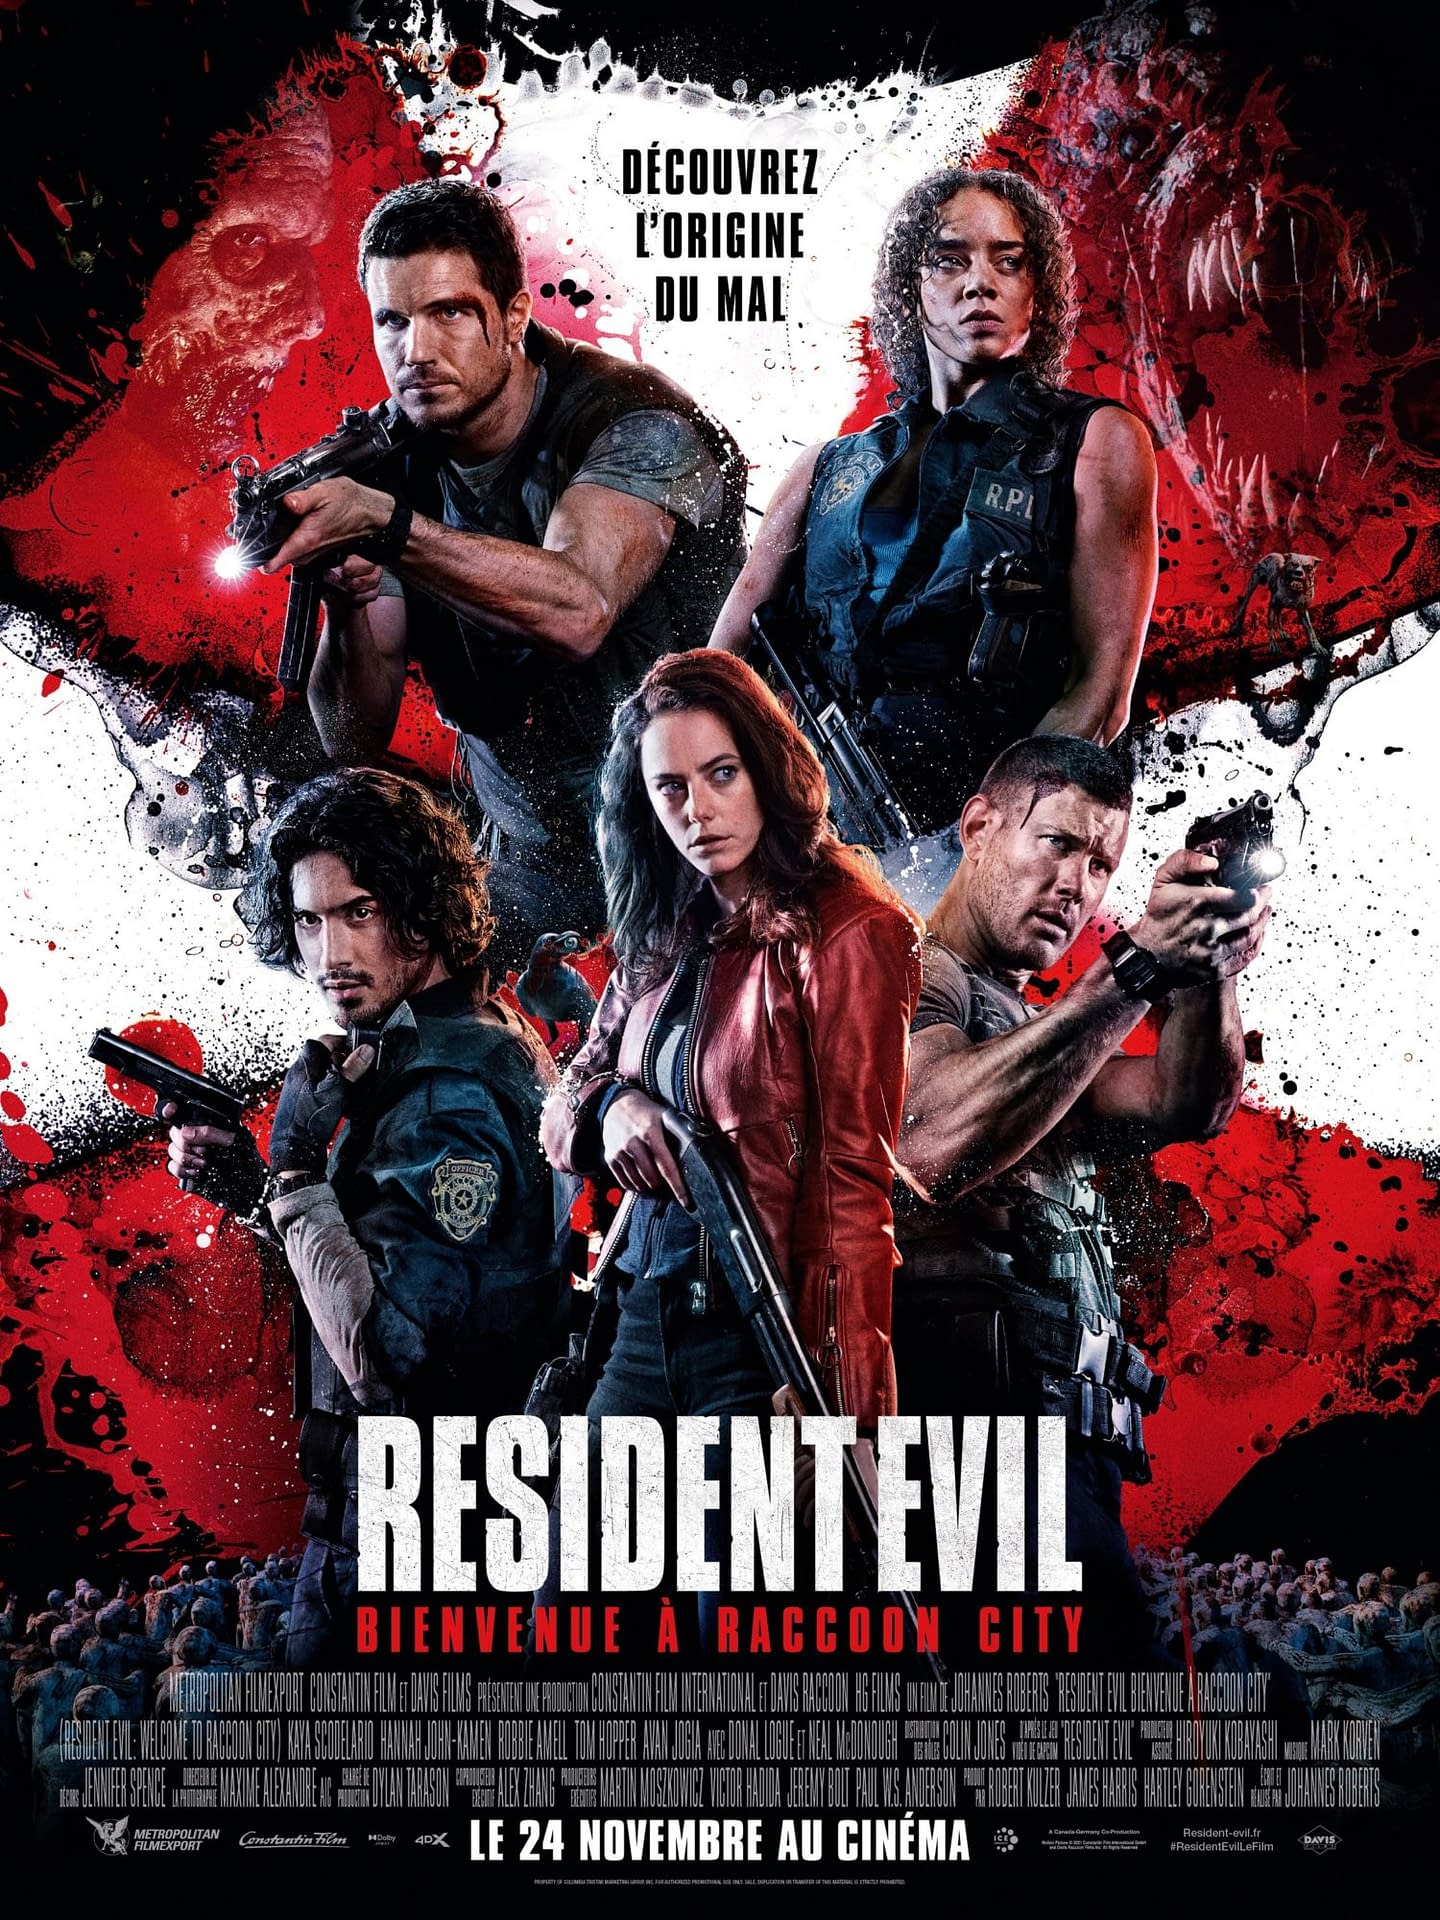 2 New Posters for Resident Evil to Raccoon City